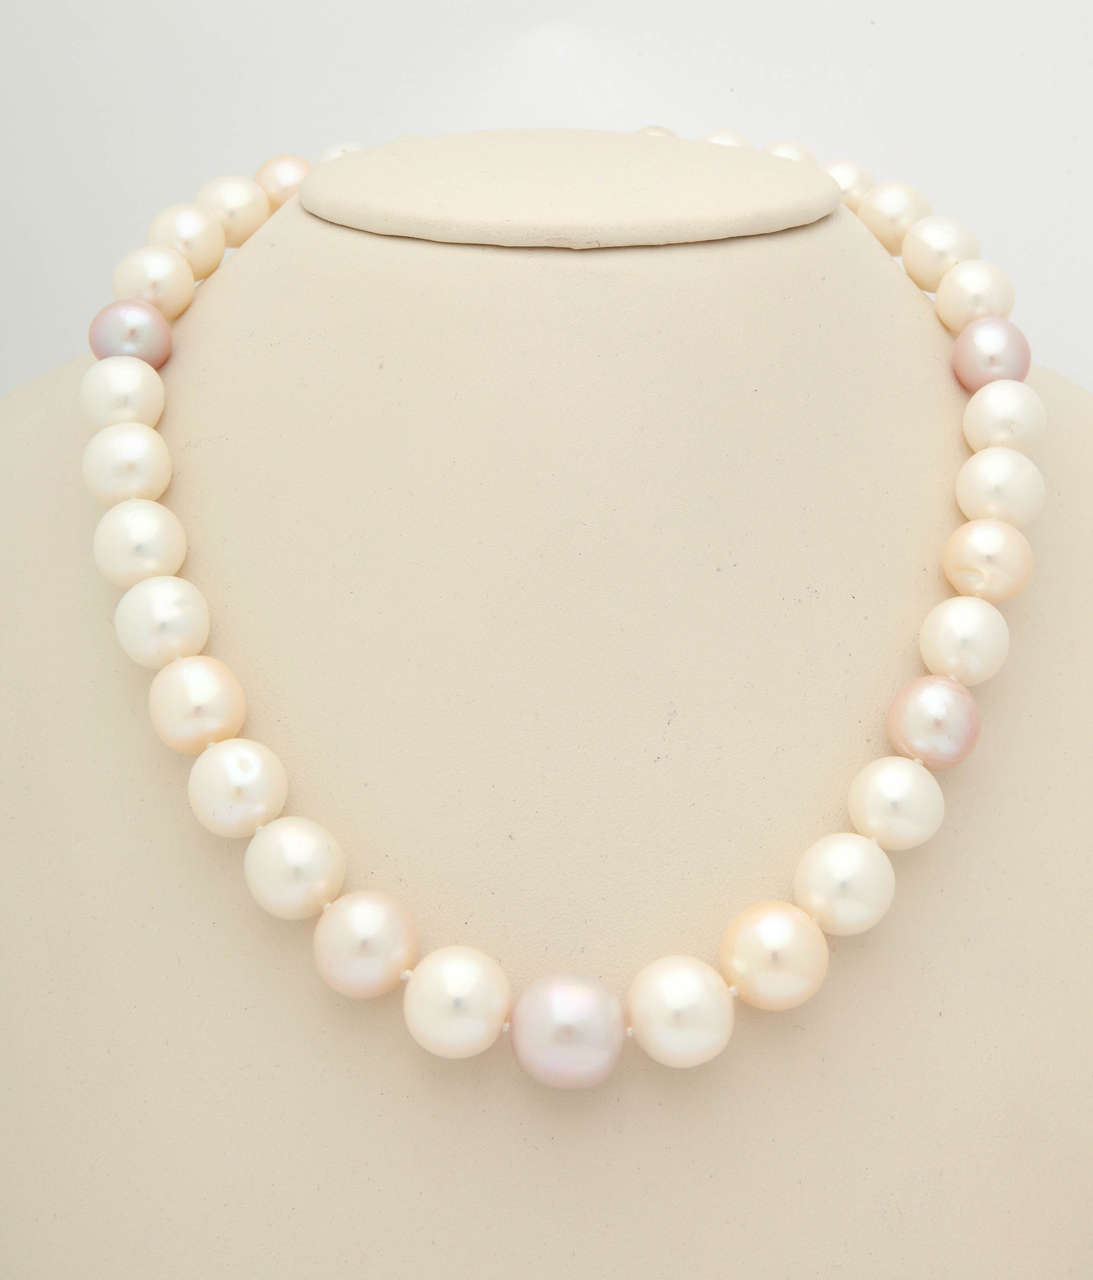 This necklace has superb pastel fresh water pearls with an excellent luster. They are slightly graduated, 16mm to 12 mm. Total length is 18 in. The clasp is 18kt yellow gold with .89cts. white diamonds. This is a great summer necklace!